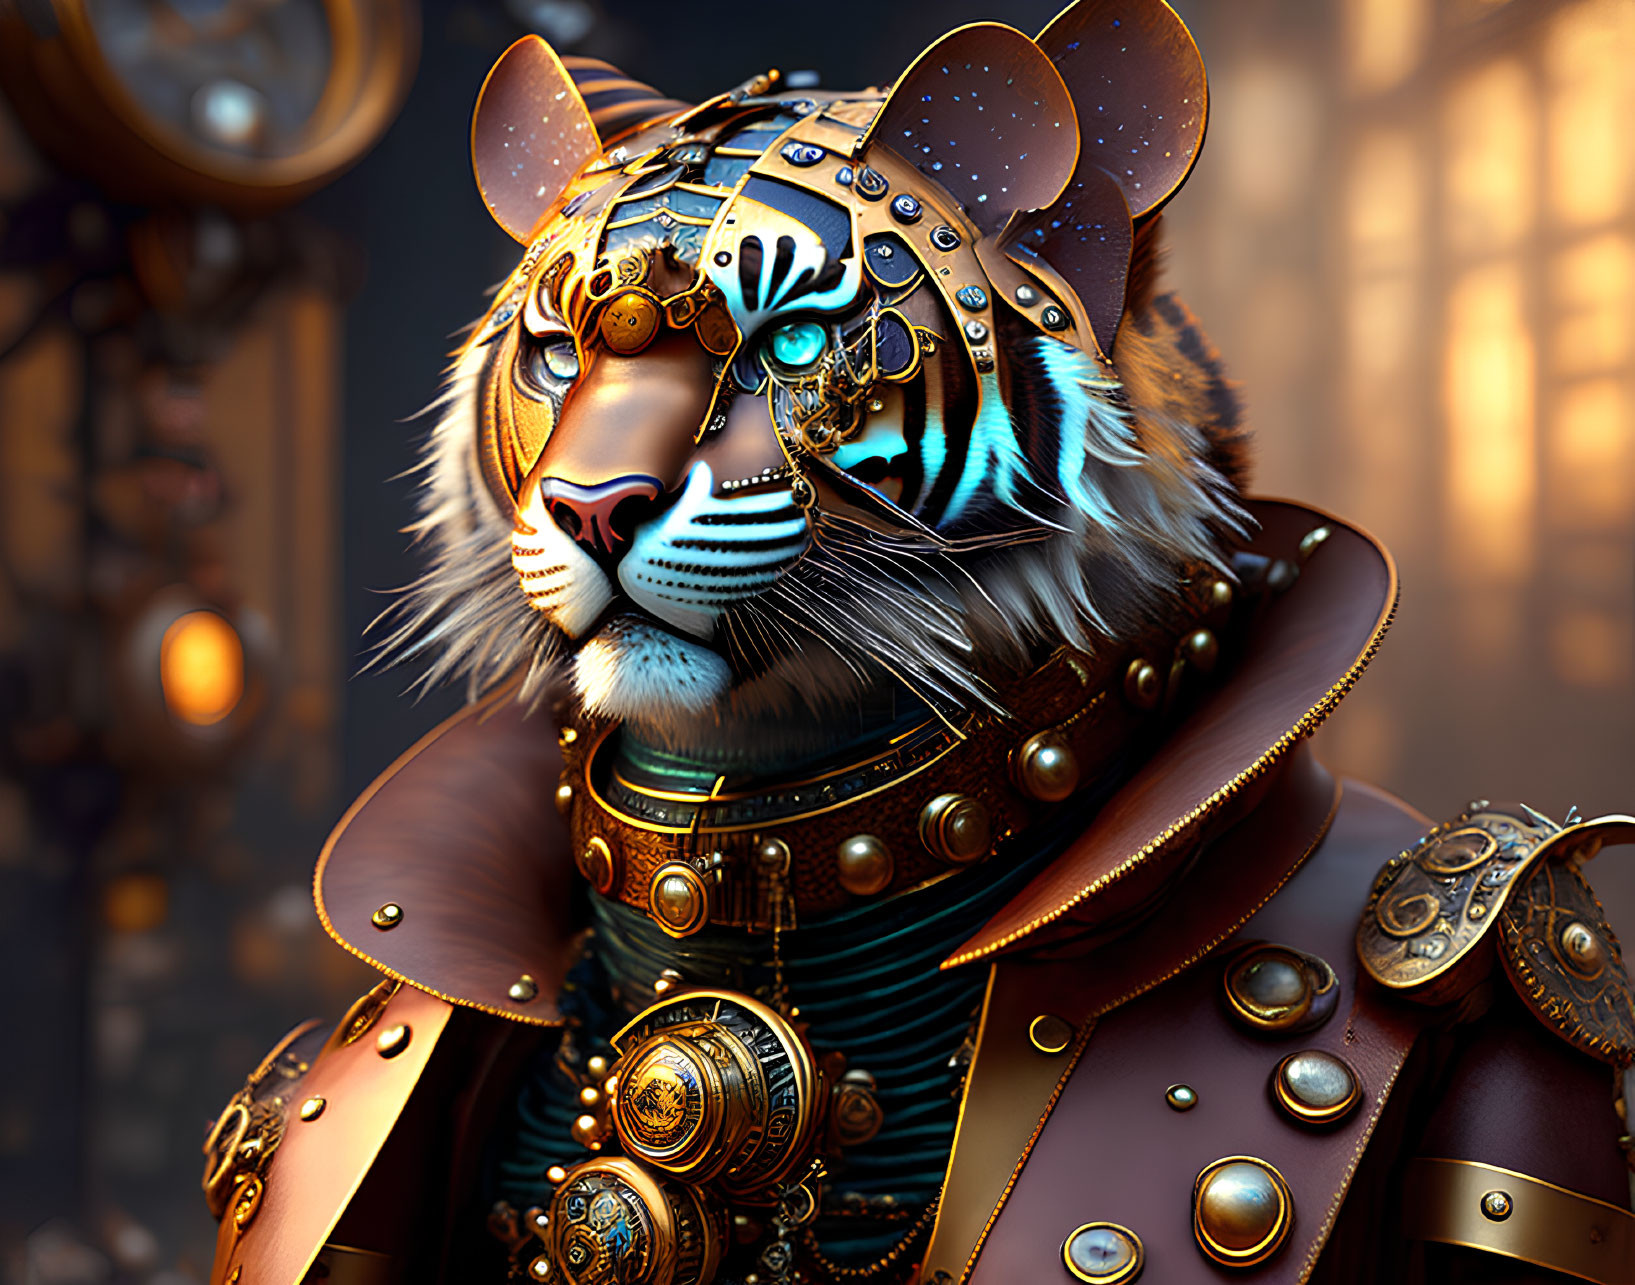 Steampunk-inspired tiger in mechanical armor against industrial backdrop